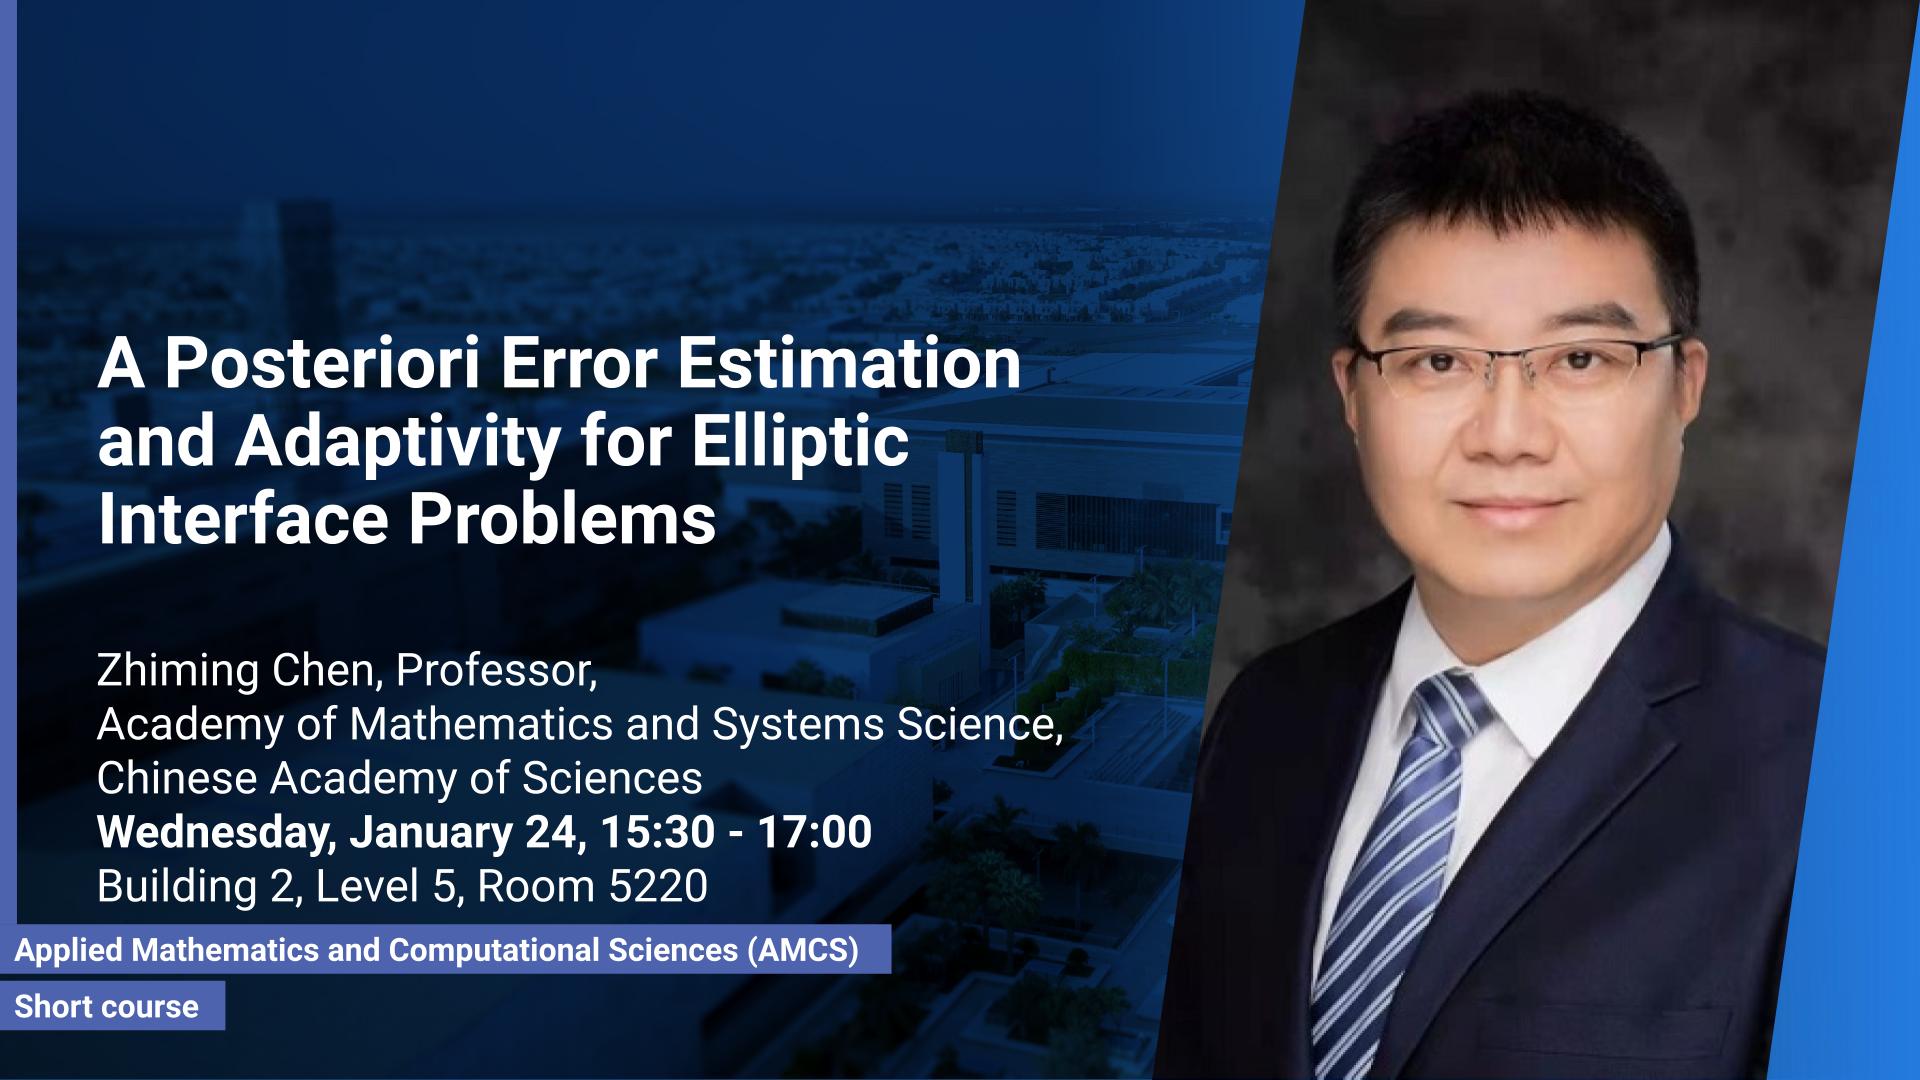 KAUST-CEMSE-AMCS-Short-Course-A-Posteriori-Error-Estimation-and-Adaptivity-for-Elliptic-Interface-Problems